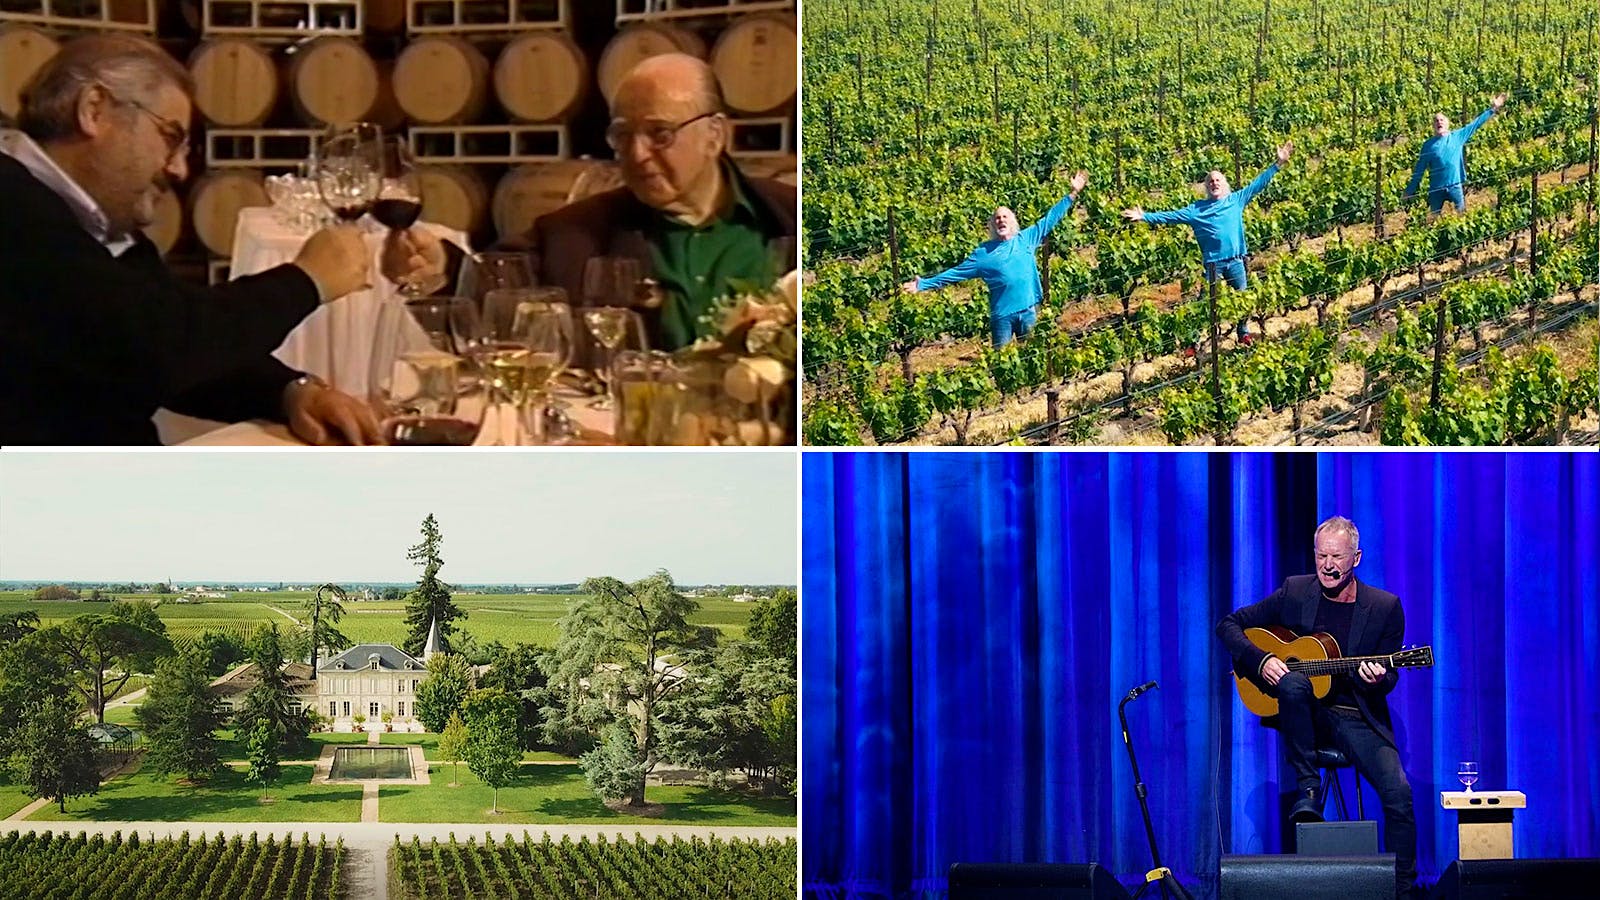 Top New Wine Videos of 2022